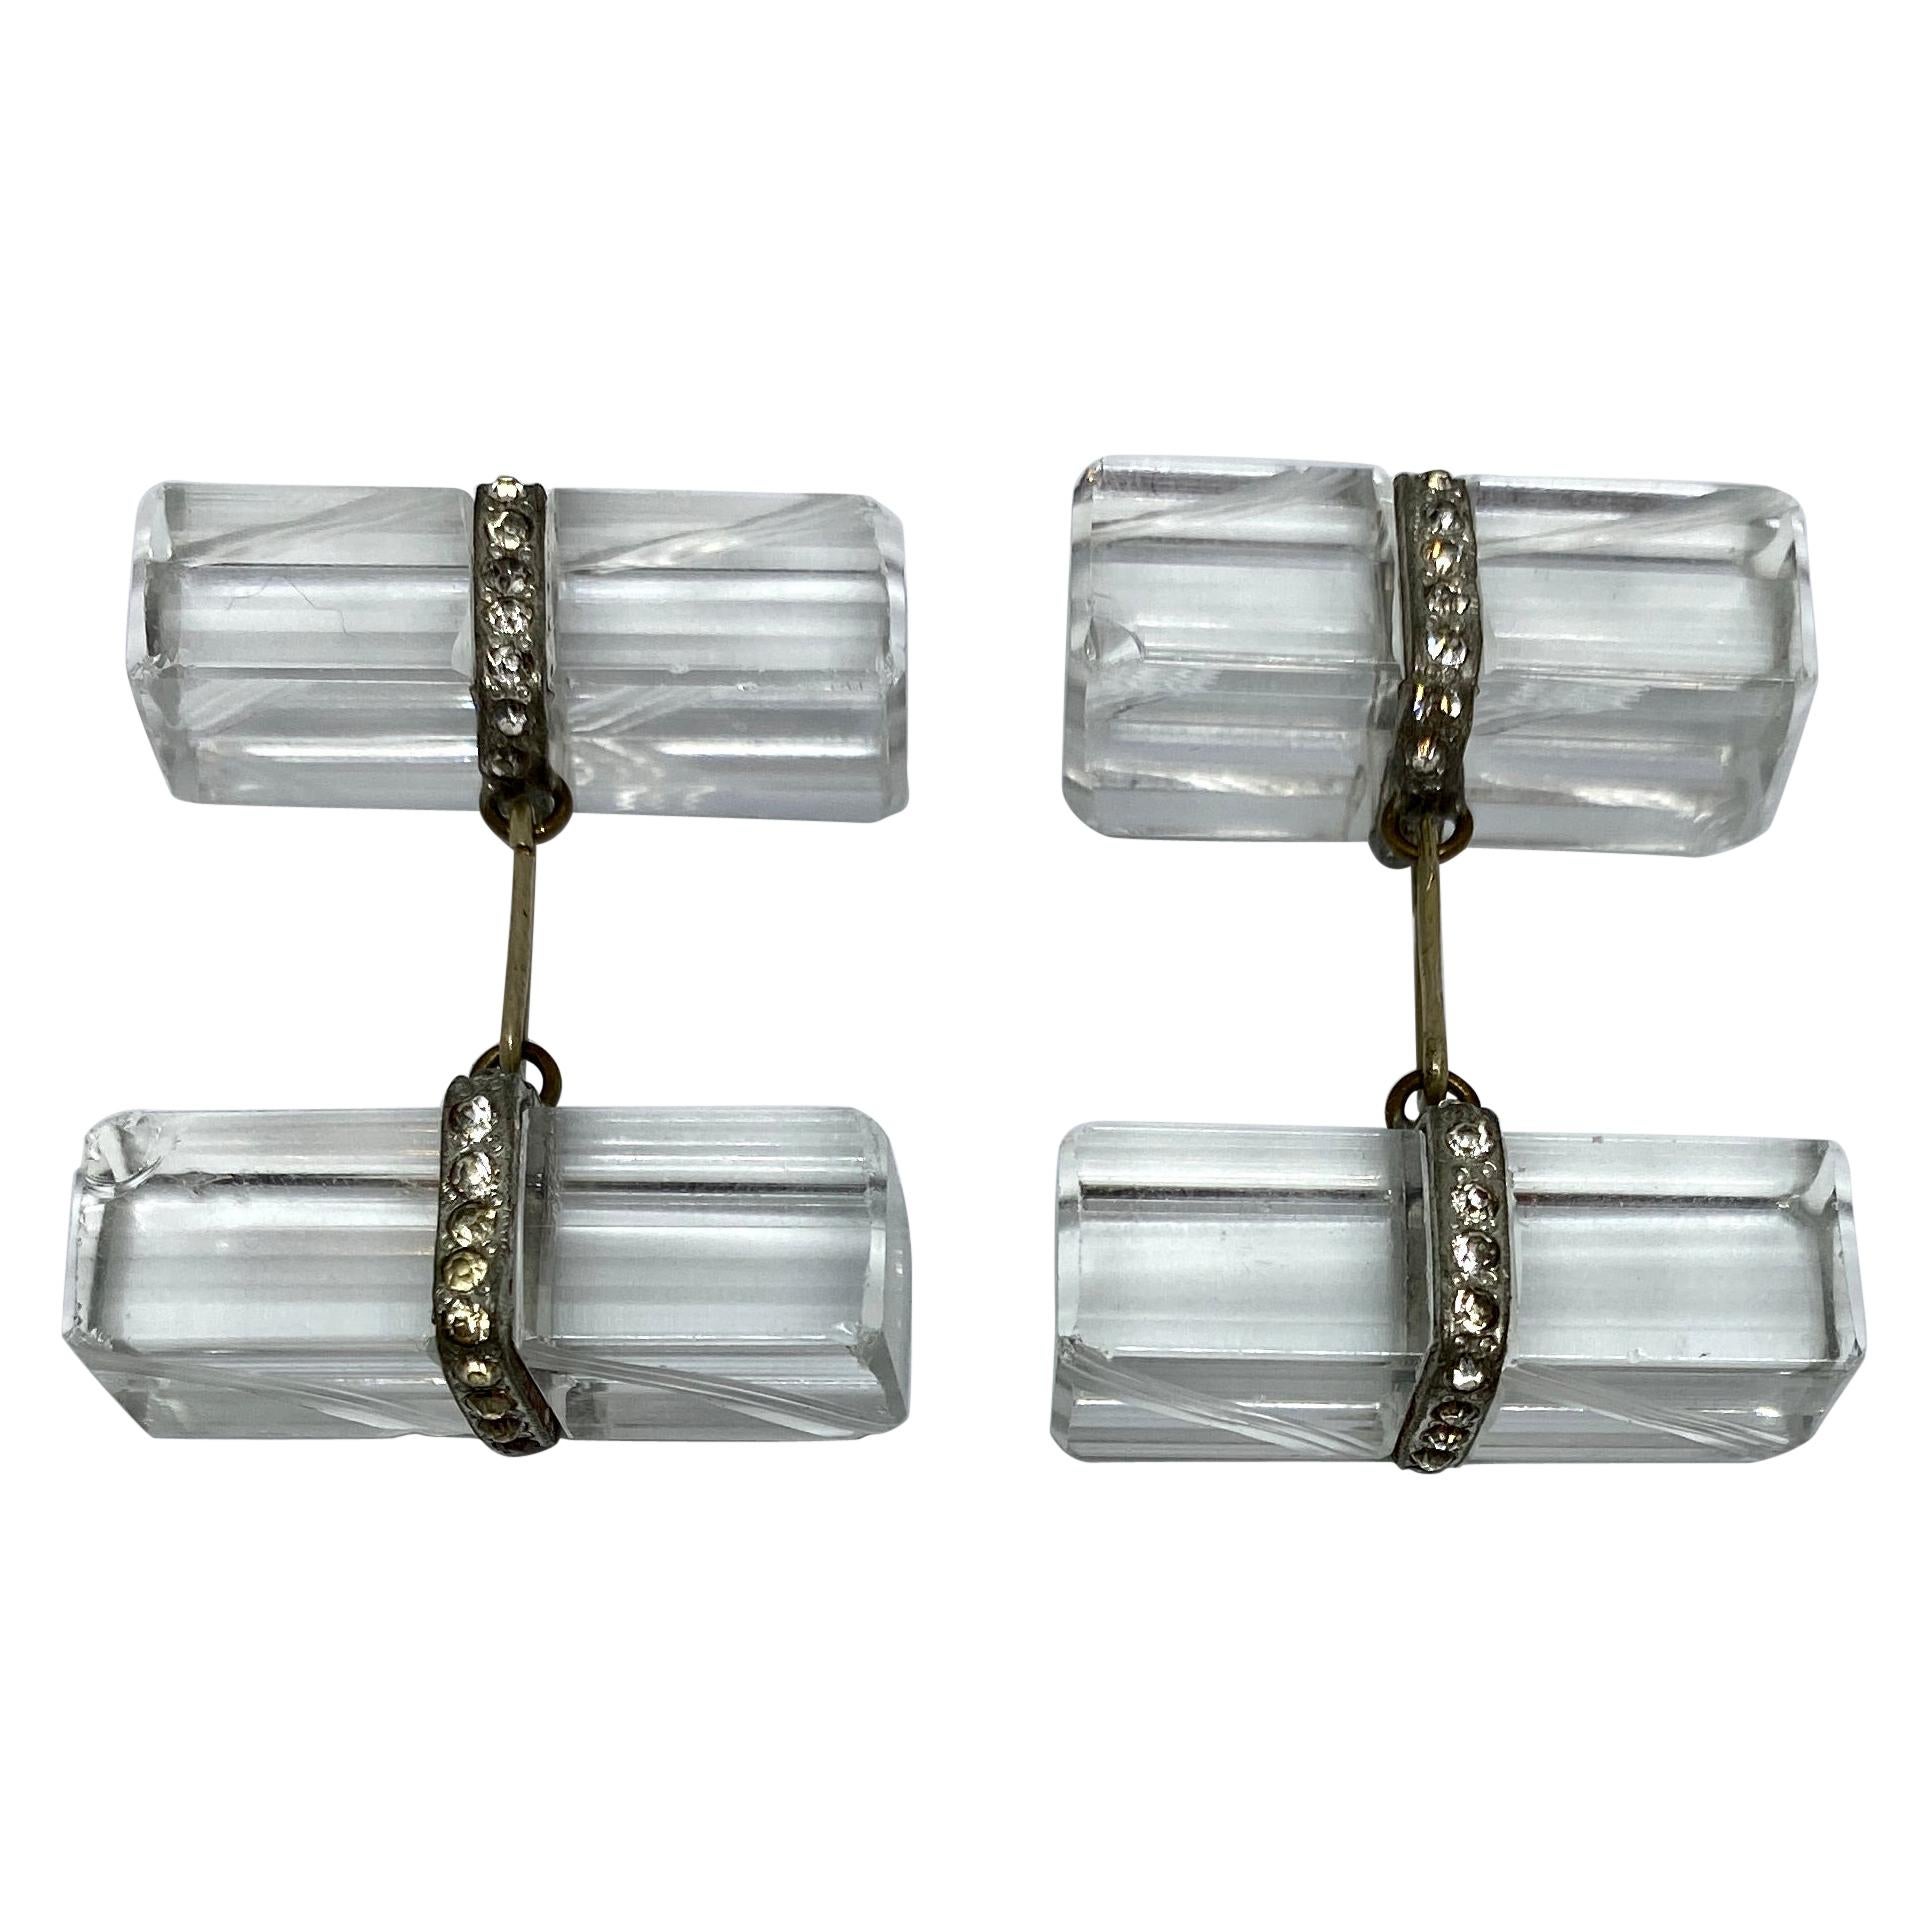 Art Deco Cufflinks in Platinum with Rock Crystal and Diamonds